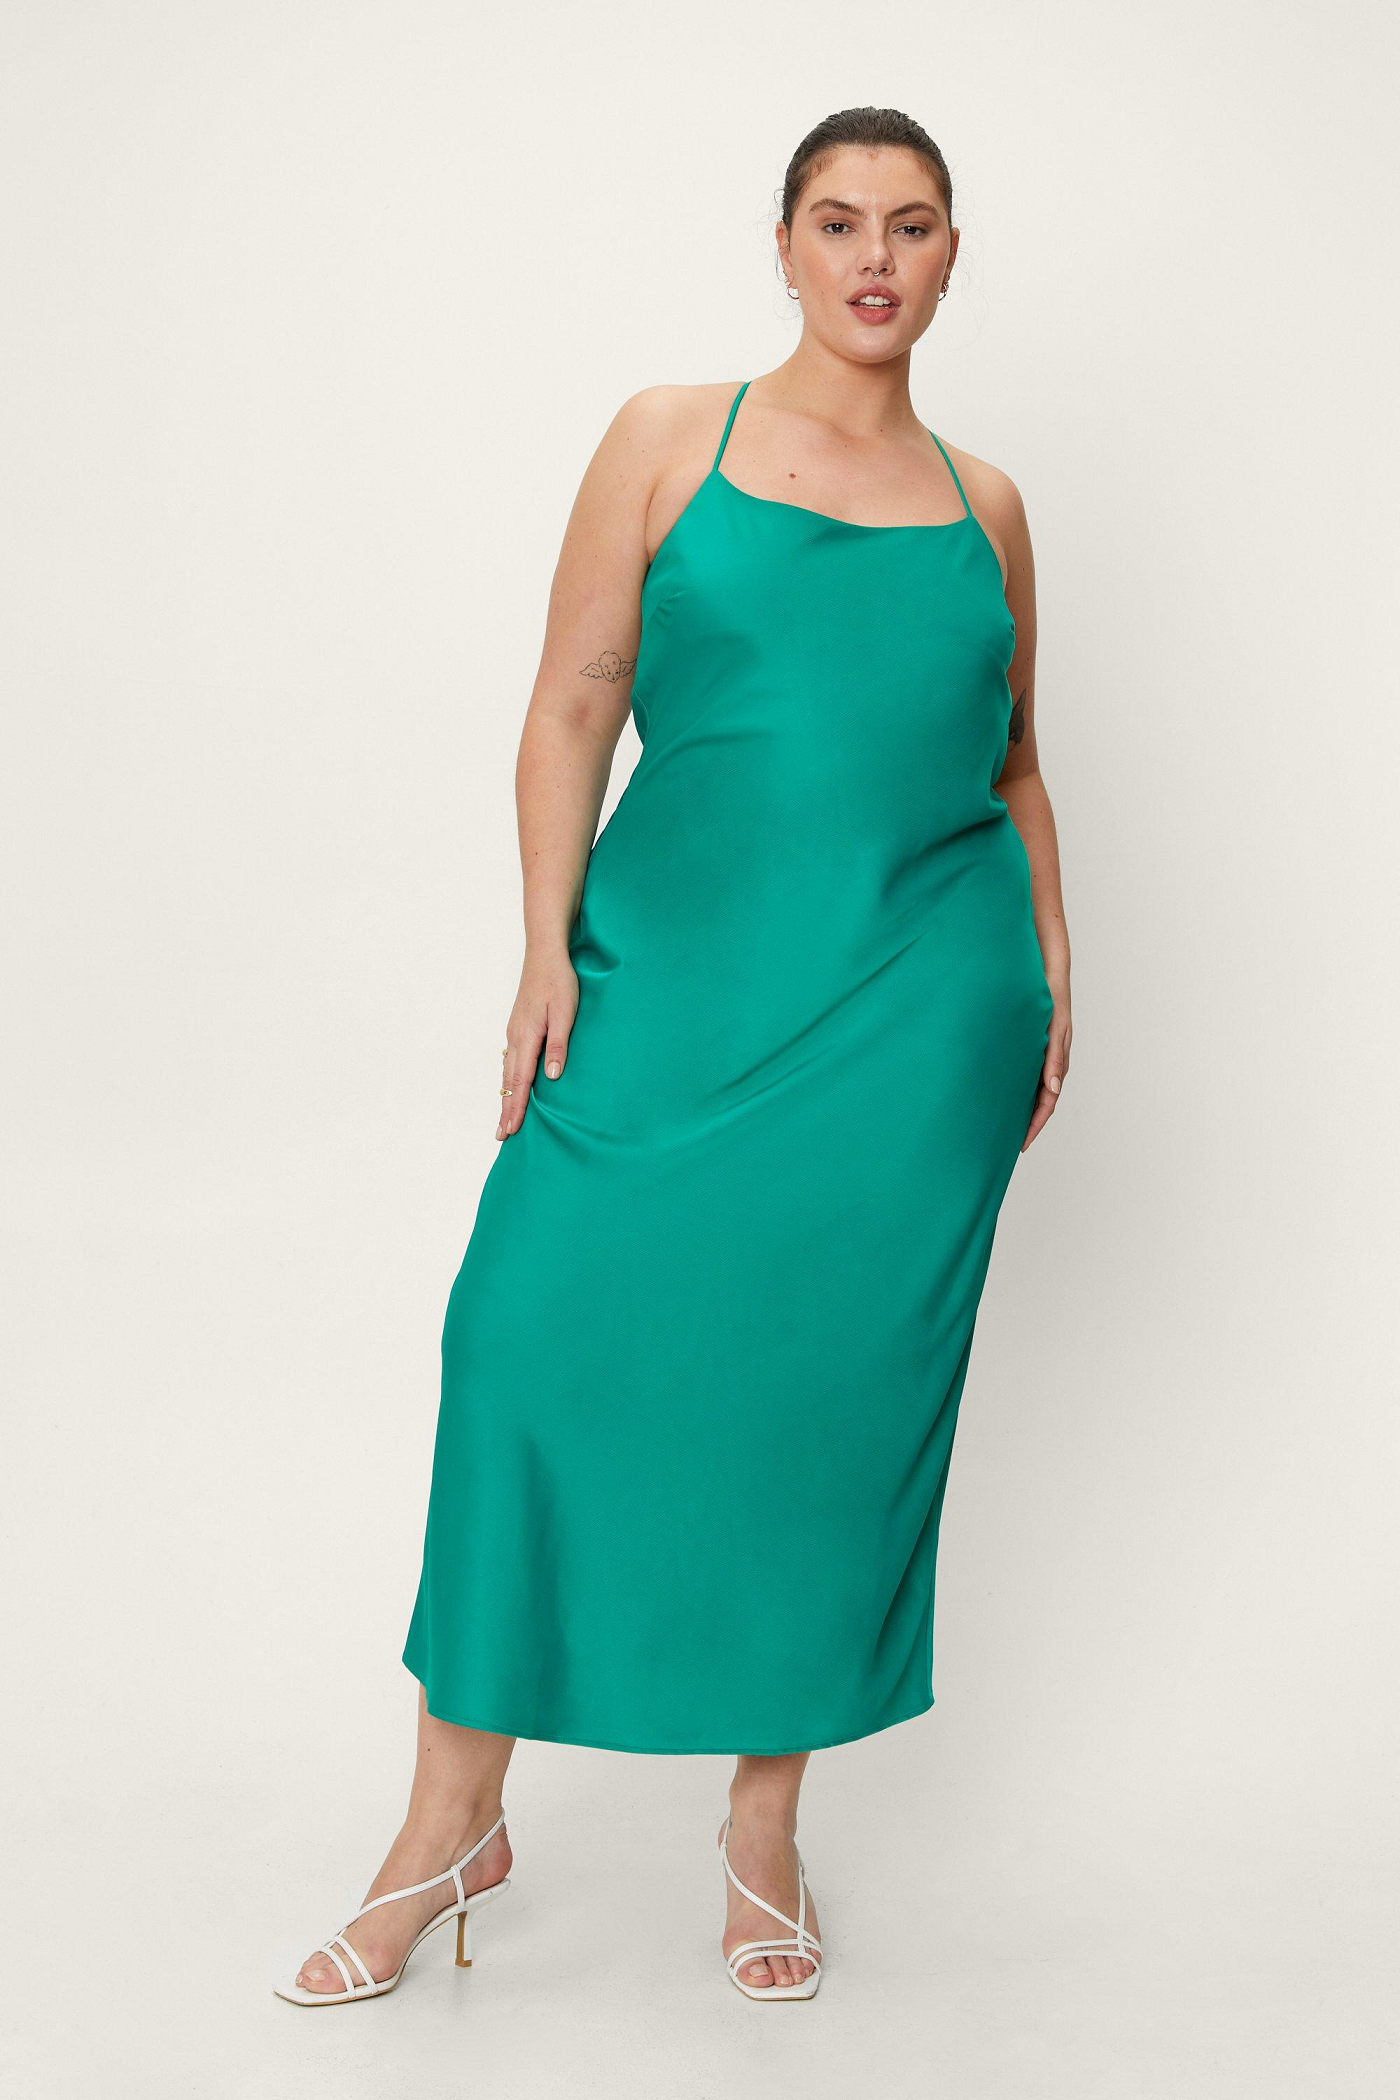 A person wearing a teal slip dress with heeled sandals